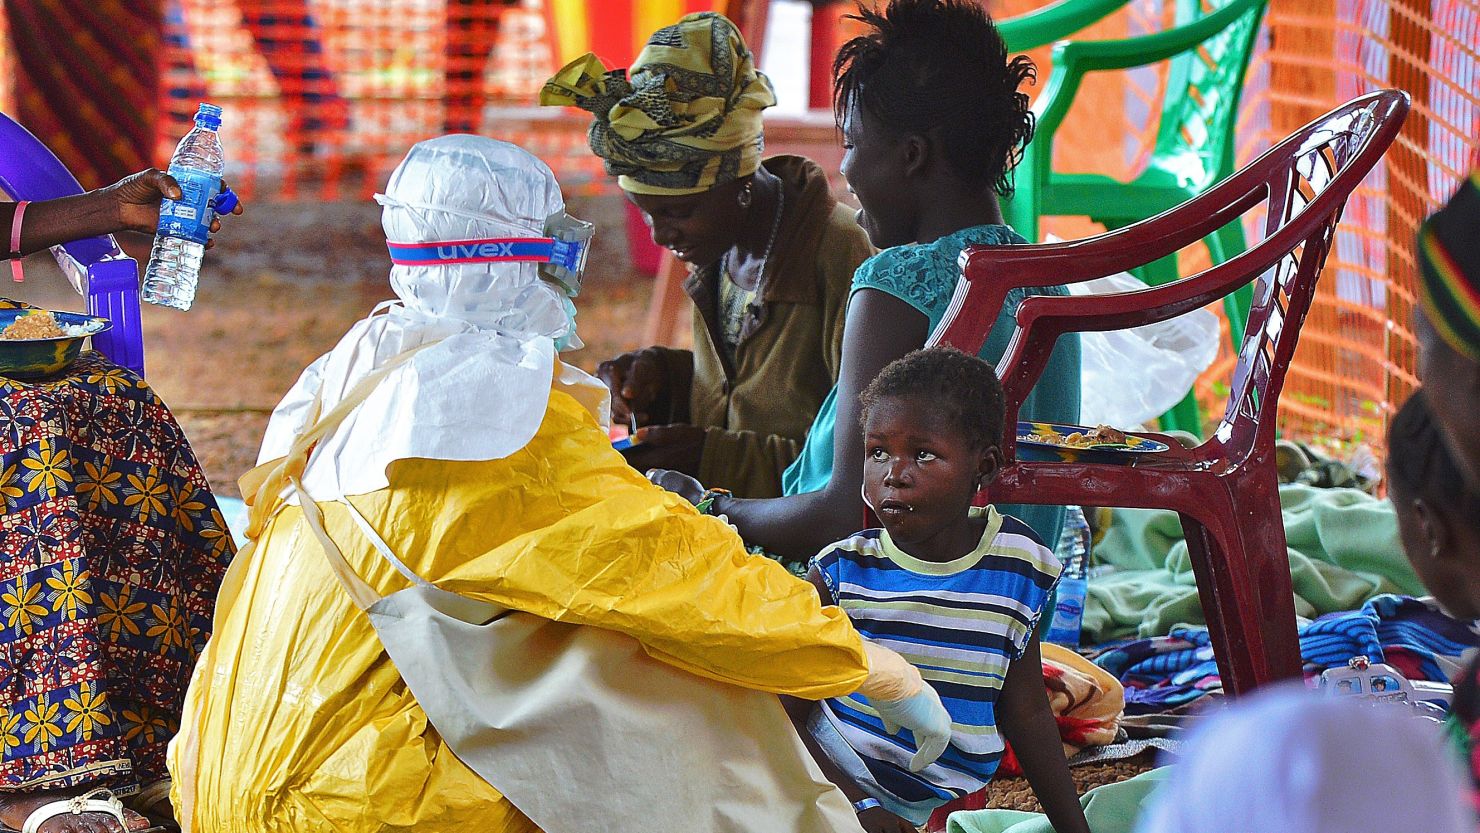 A MSF medical worker feeds an Ebola child victim at an MSF facility in Kailahun, Sierra Leone.